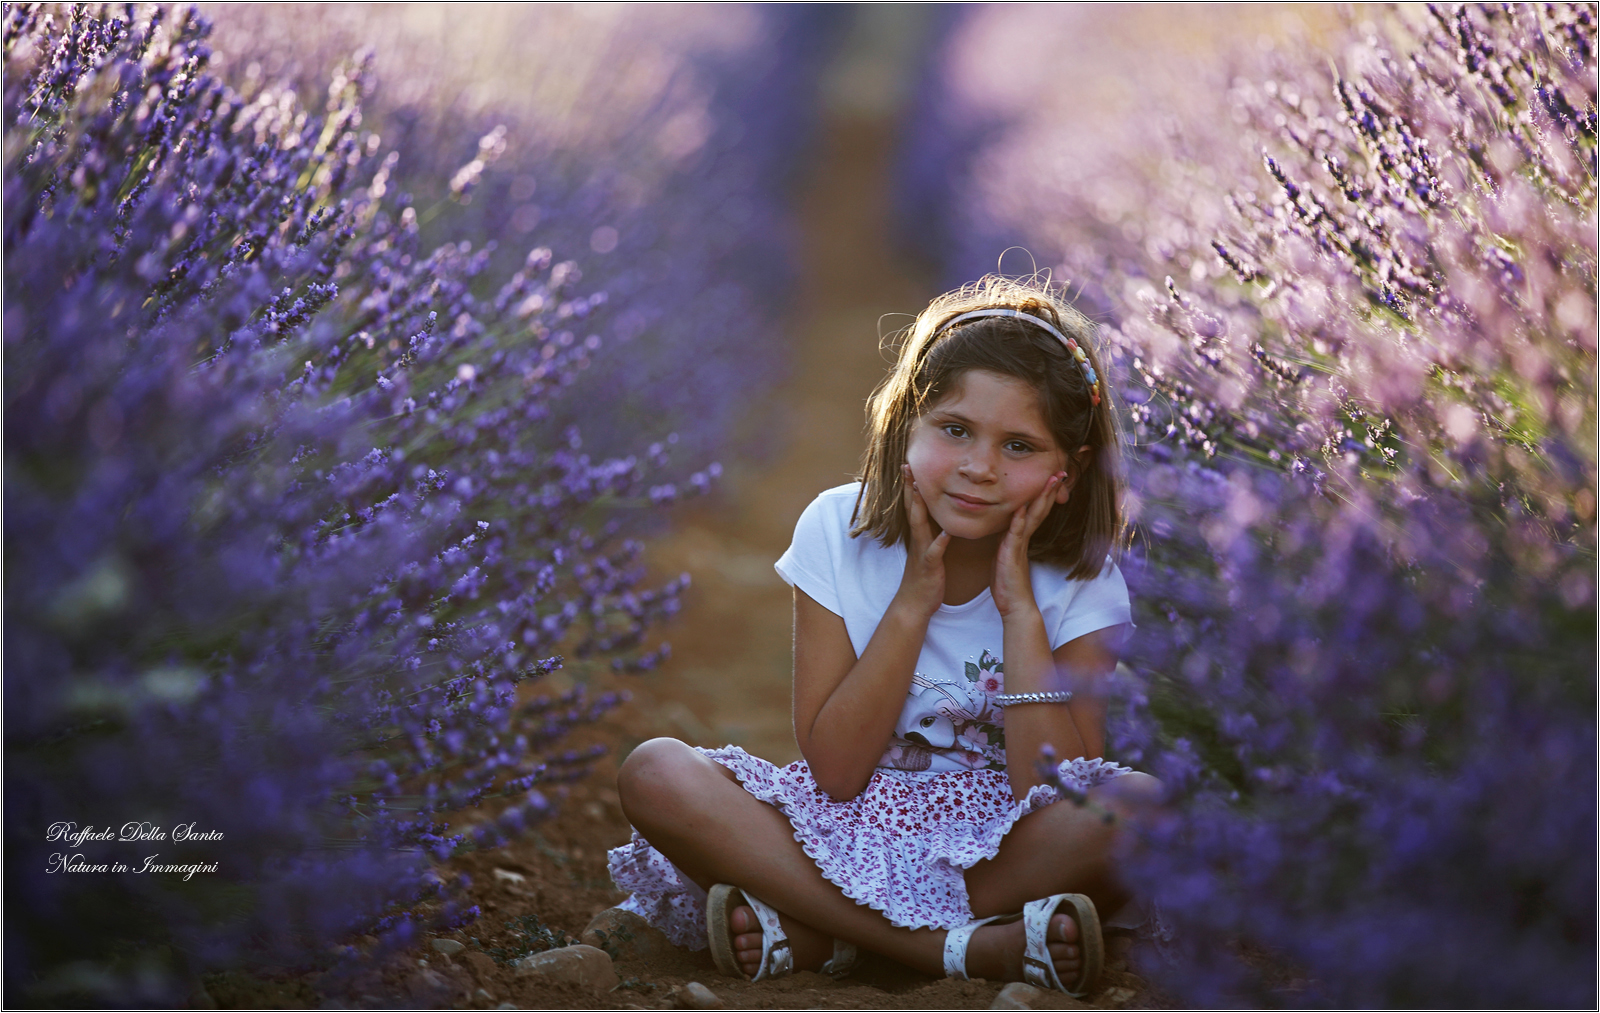 Immersed in lavender...